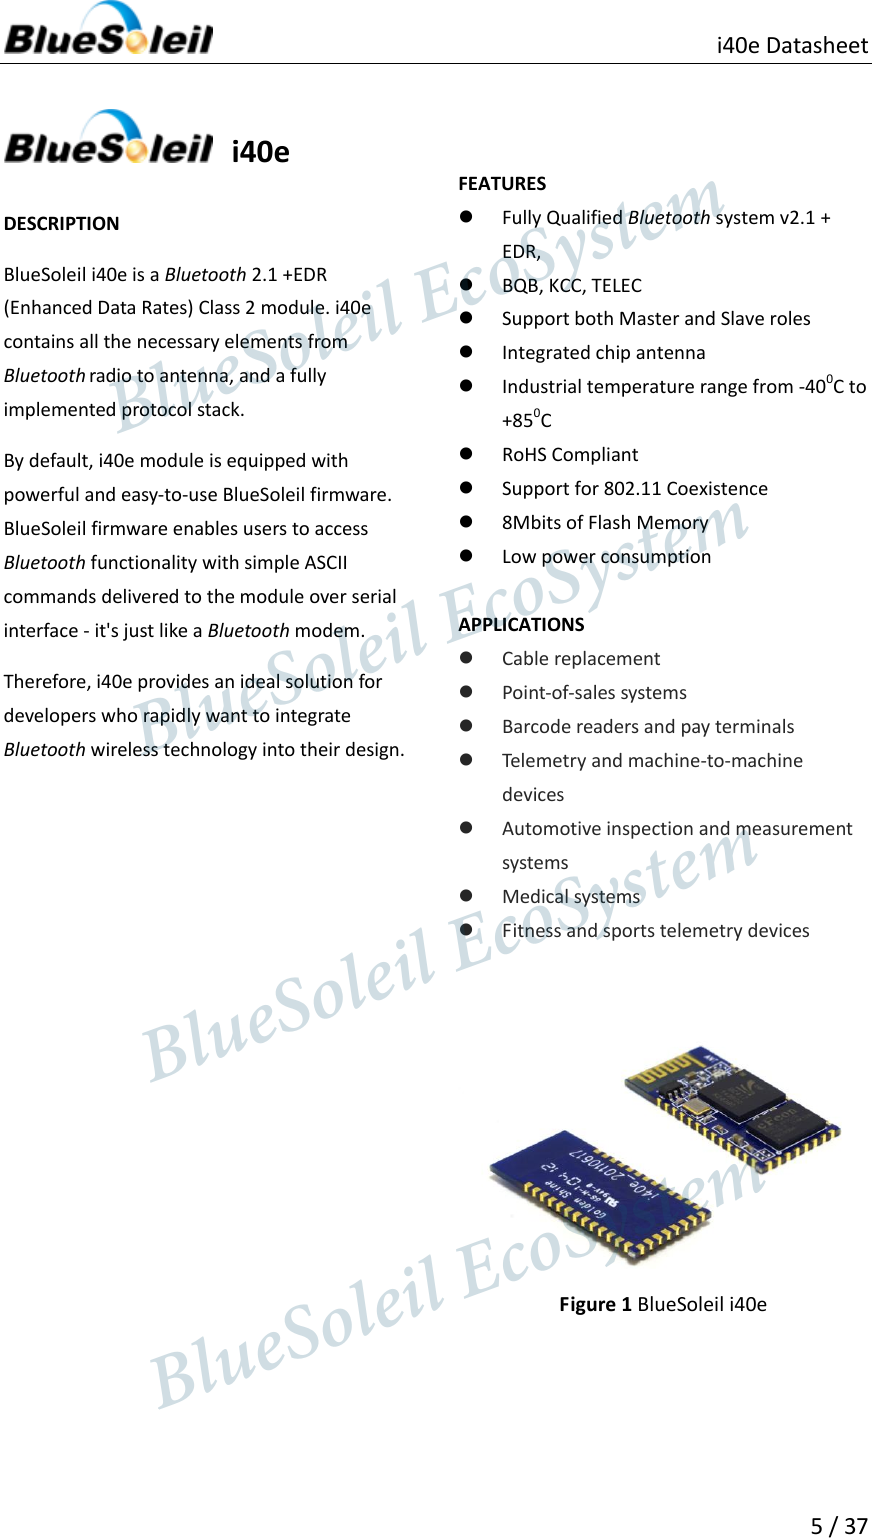                          i40e Datasheet   5 / 37      i40e  DESCRIPTION BlueSoleil i40e is a Bluetooth 2.1 +EDR (Enhanced Data Rates) Class 2 module. i40e contains all the necessary elements from Bluetooth radio to antenna, and a fully implemented protocol stack. By default, i40e module is equipped with powerful and easy-to-use BlueSoleil firmware. BlueSoleil firmware enables users to access Bluetooth functionality with simple ASCII commands delivered to the module over serial interface - it&apos;s just like a Bluetooth modem. Therefore, i40e provides an ideal solution for developers who rapidly want to integrate Bluetooth wireless technology into their design.                       FEATURES  Fully Qualified Bluetooth system v2.1 + EDR,  BQB, KCC, TELEC  Support both Master and Slave roles  Integrated chip antenna  Industrial temperature range from -400C to +850C  RoHS Compliant  Support for 802.11 Coexistence  8Mbits of Flash Memory  Low power consumption  APPLICATIONS  Cable replacement  Point-of-sales systems  Barcode readers and pay terminals  Telemetry and machine-to-machine devices  Automotive inspection and measurement systems  Medical systems  Fitness and sports telemetry devices    Figure 1 BlueSoleil i40e                    BlueSoleil EcoSystem            BlueSoleil EcoSystem      BlueSoleil EcoSystemBlueSoleil EcoSystem